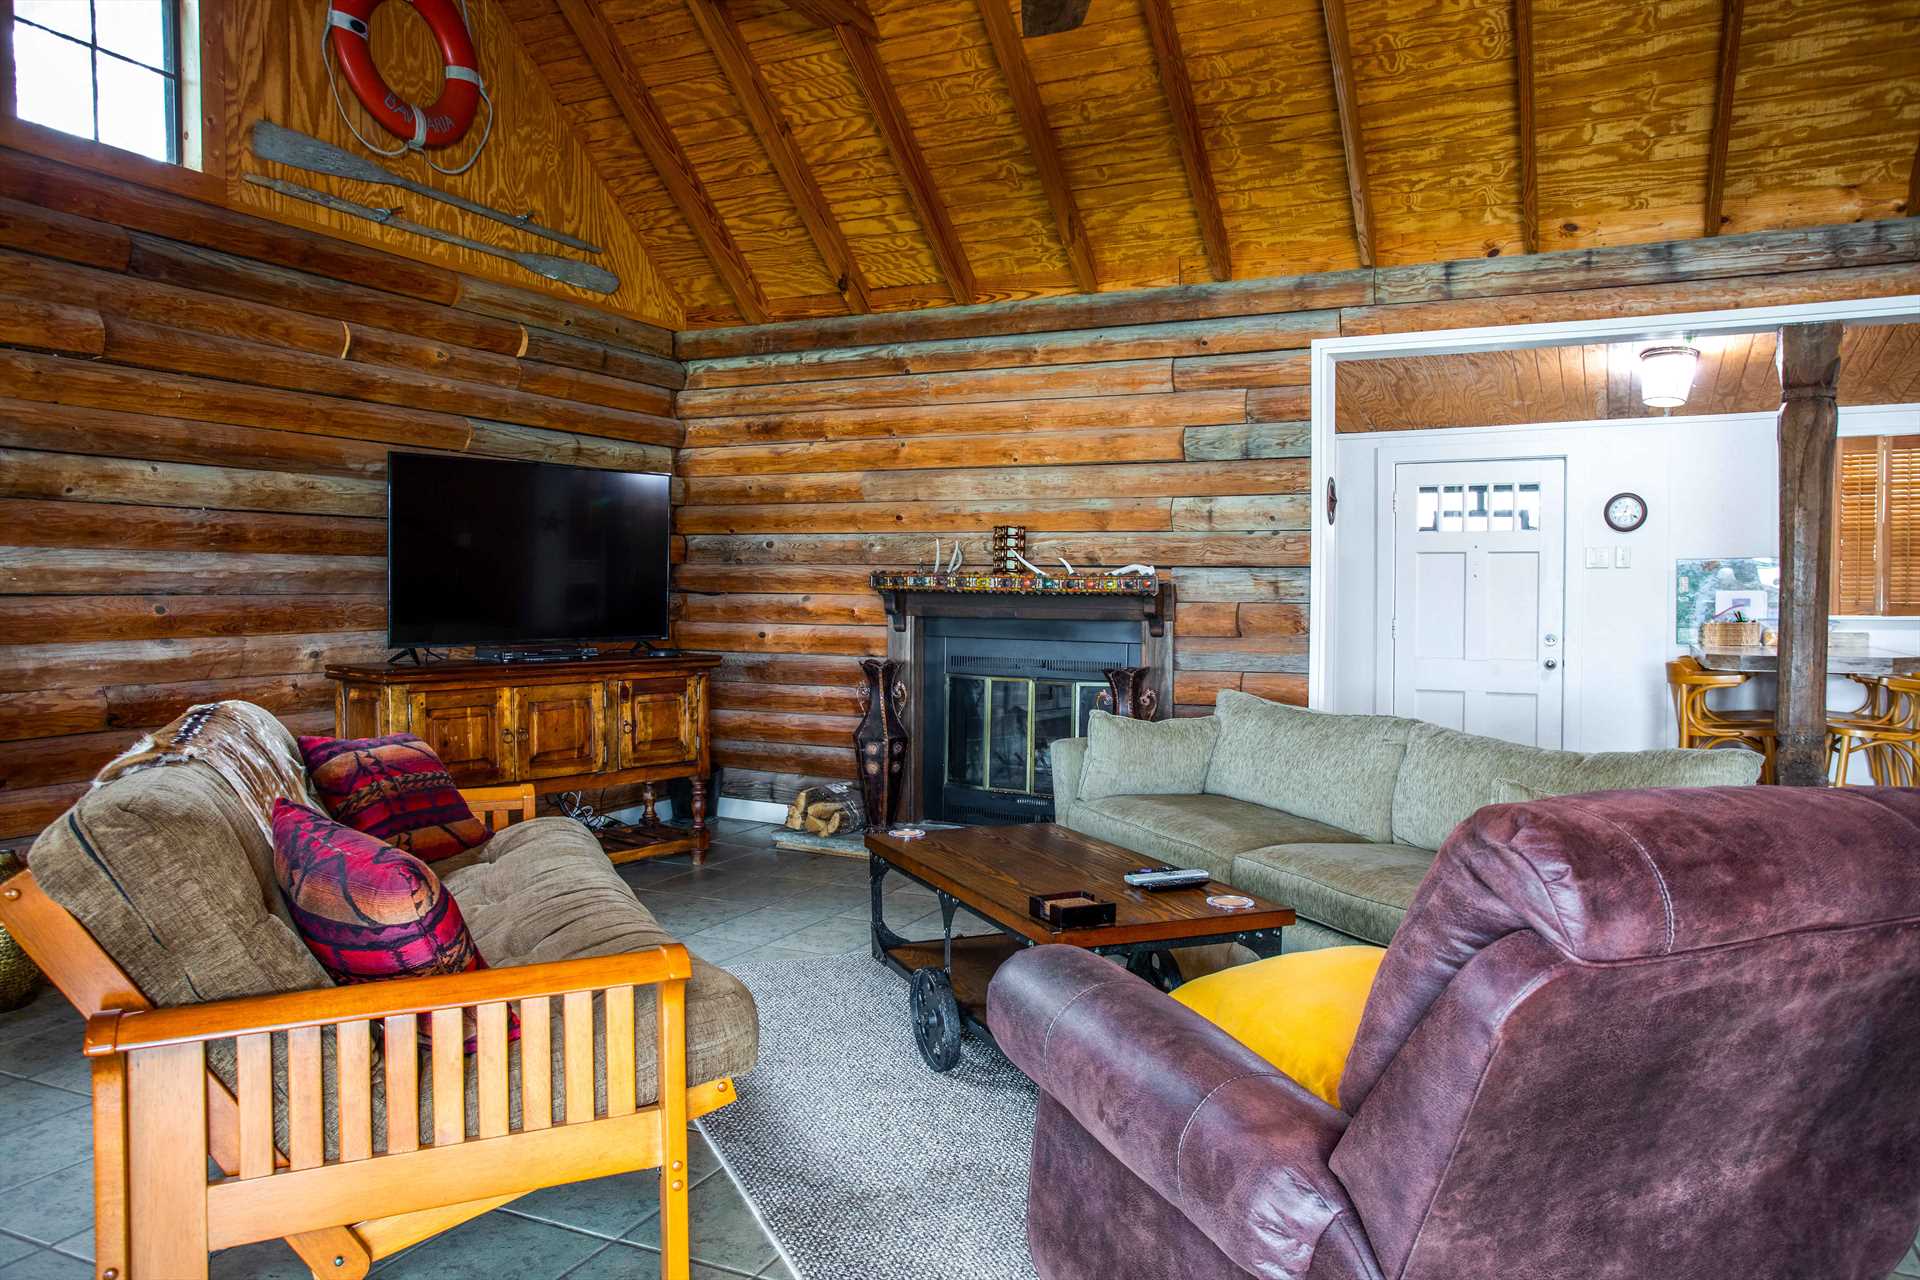                                                 A fireplace, TV with Roku, Wifi Internet service, and a comfy double futon/bed round out the amenities in this fantastic Hill Country escape!